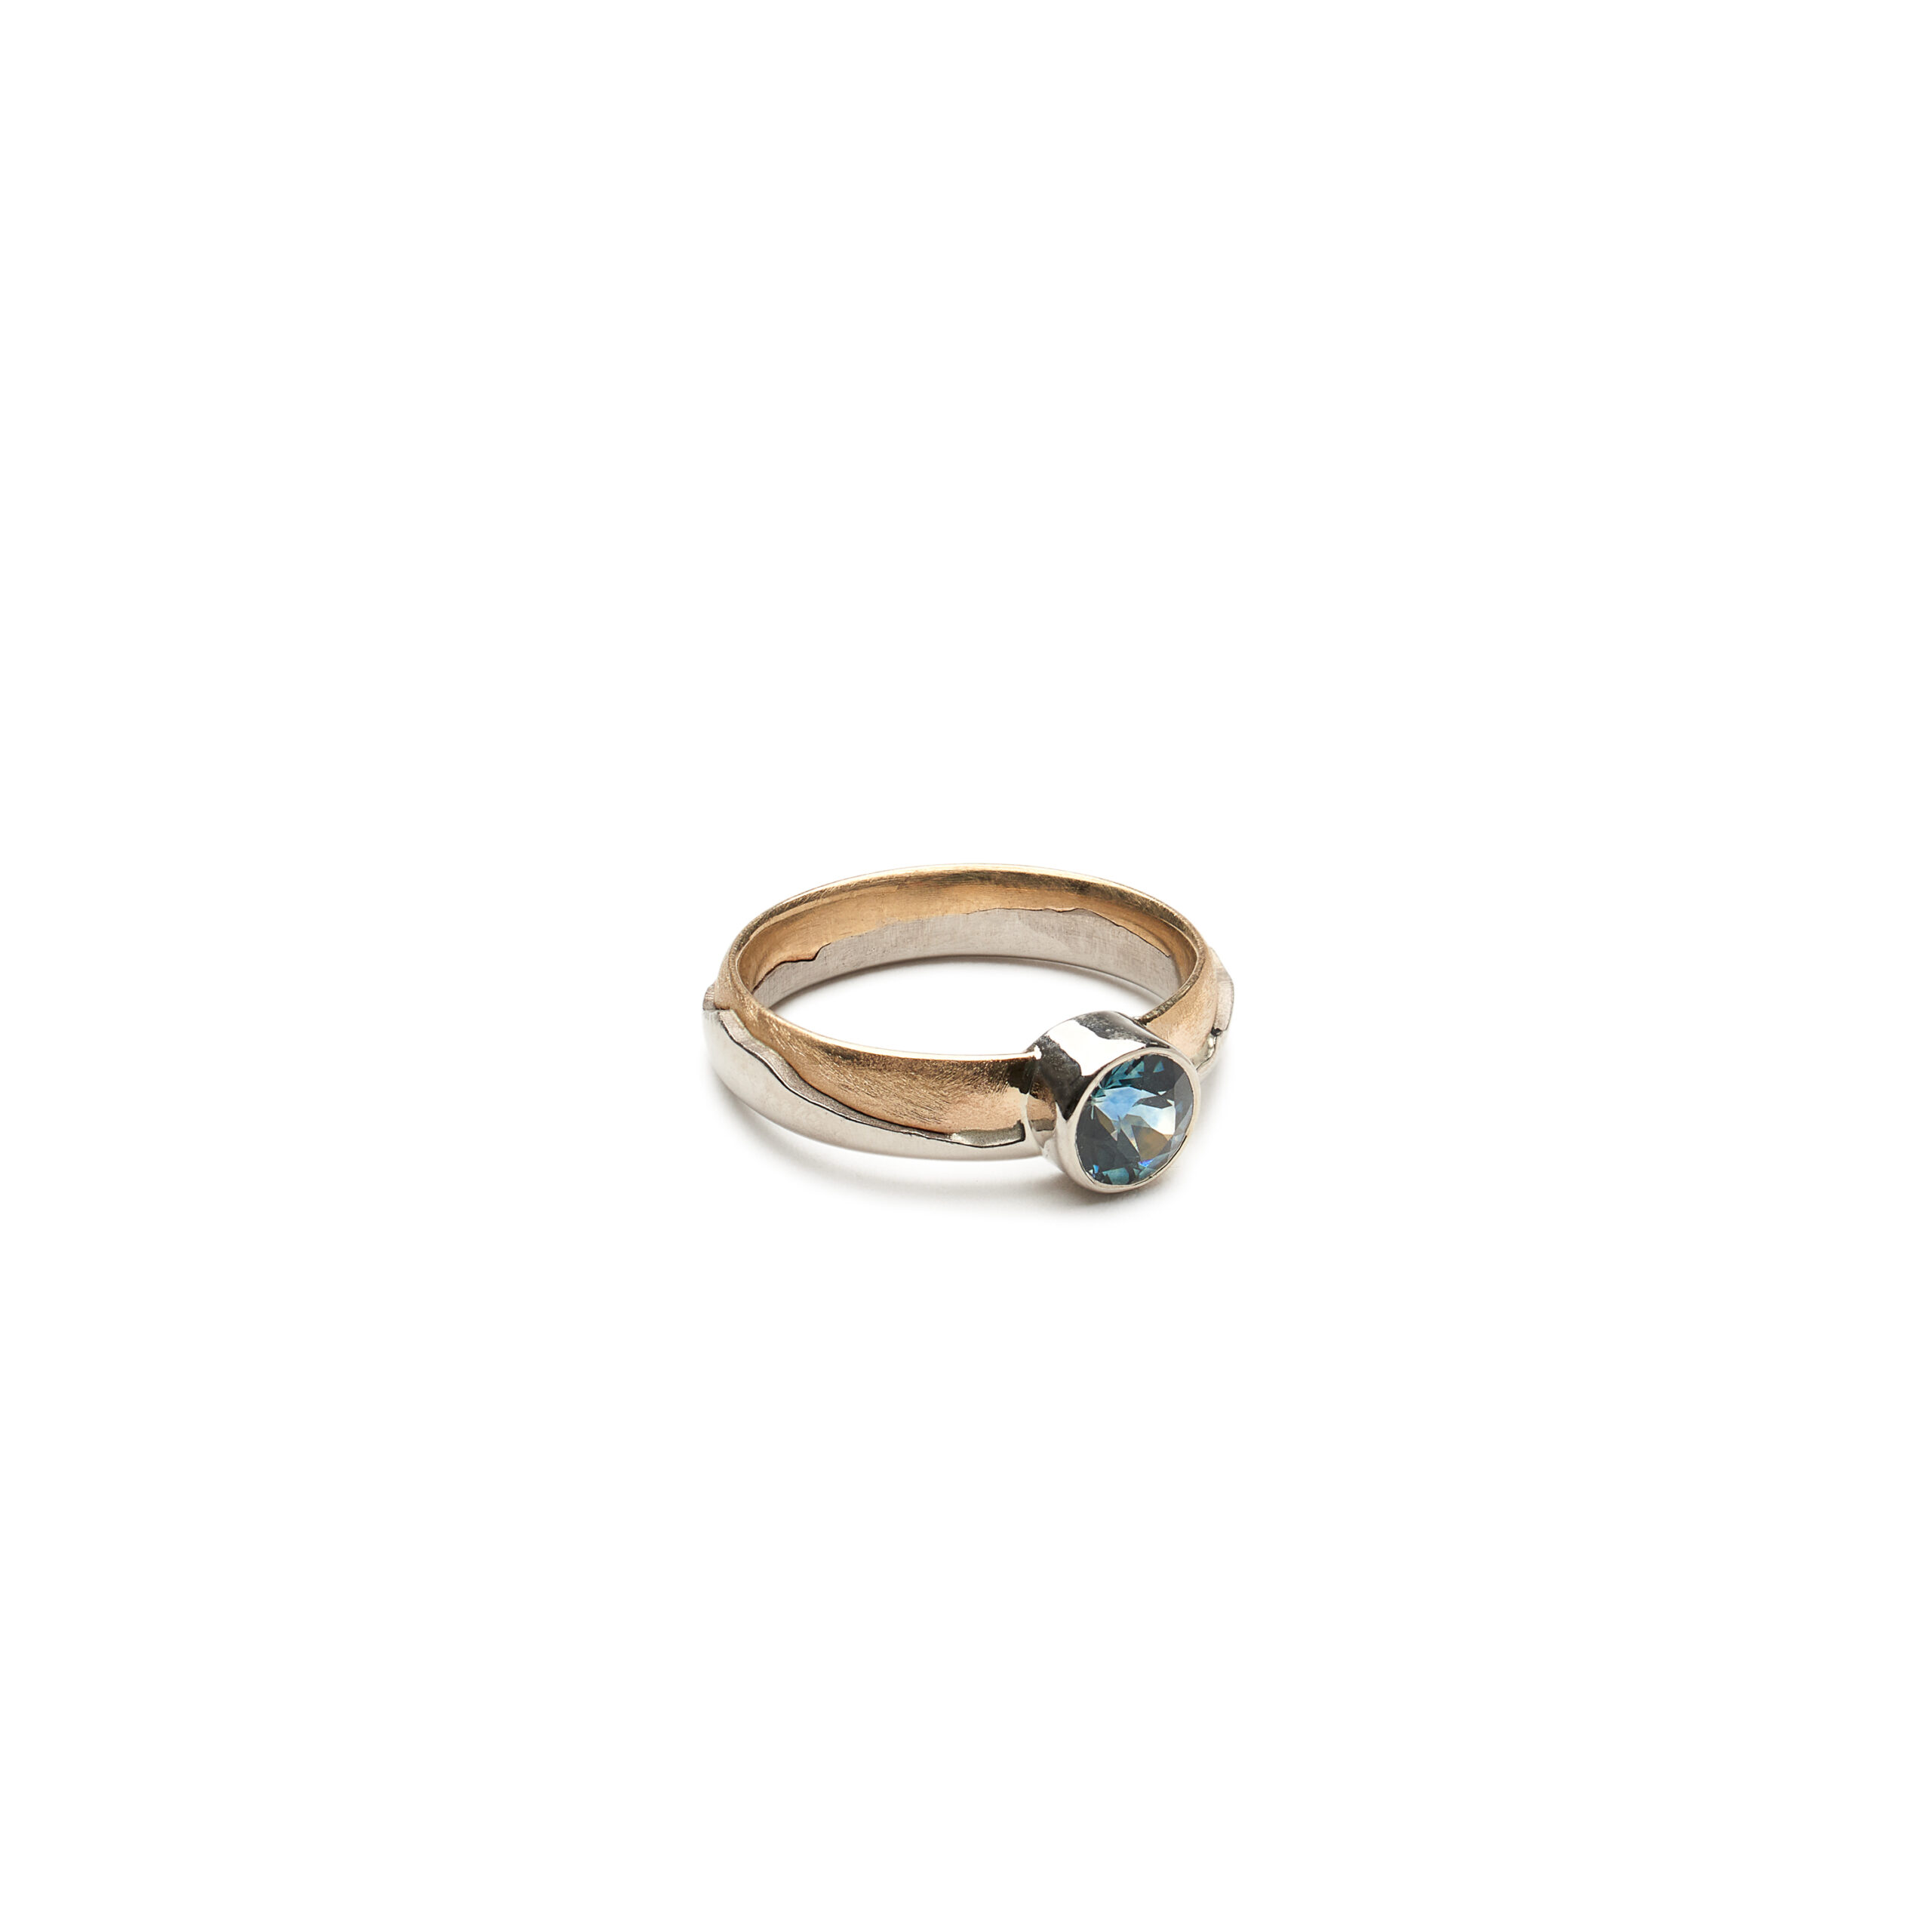 Dual metal gold ring with blue gemstone